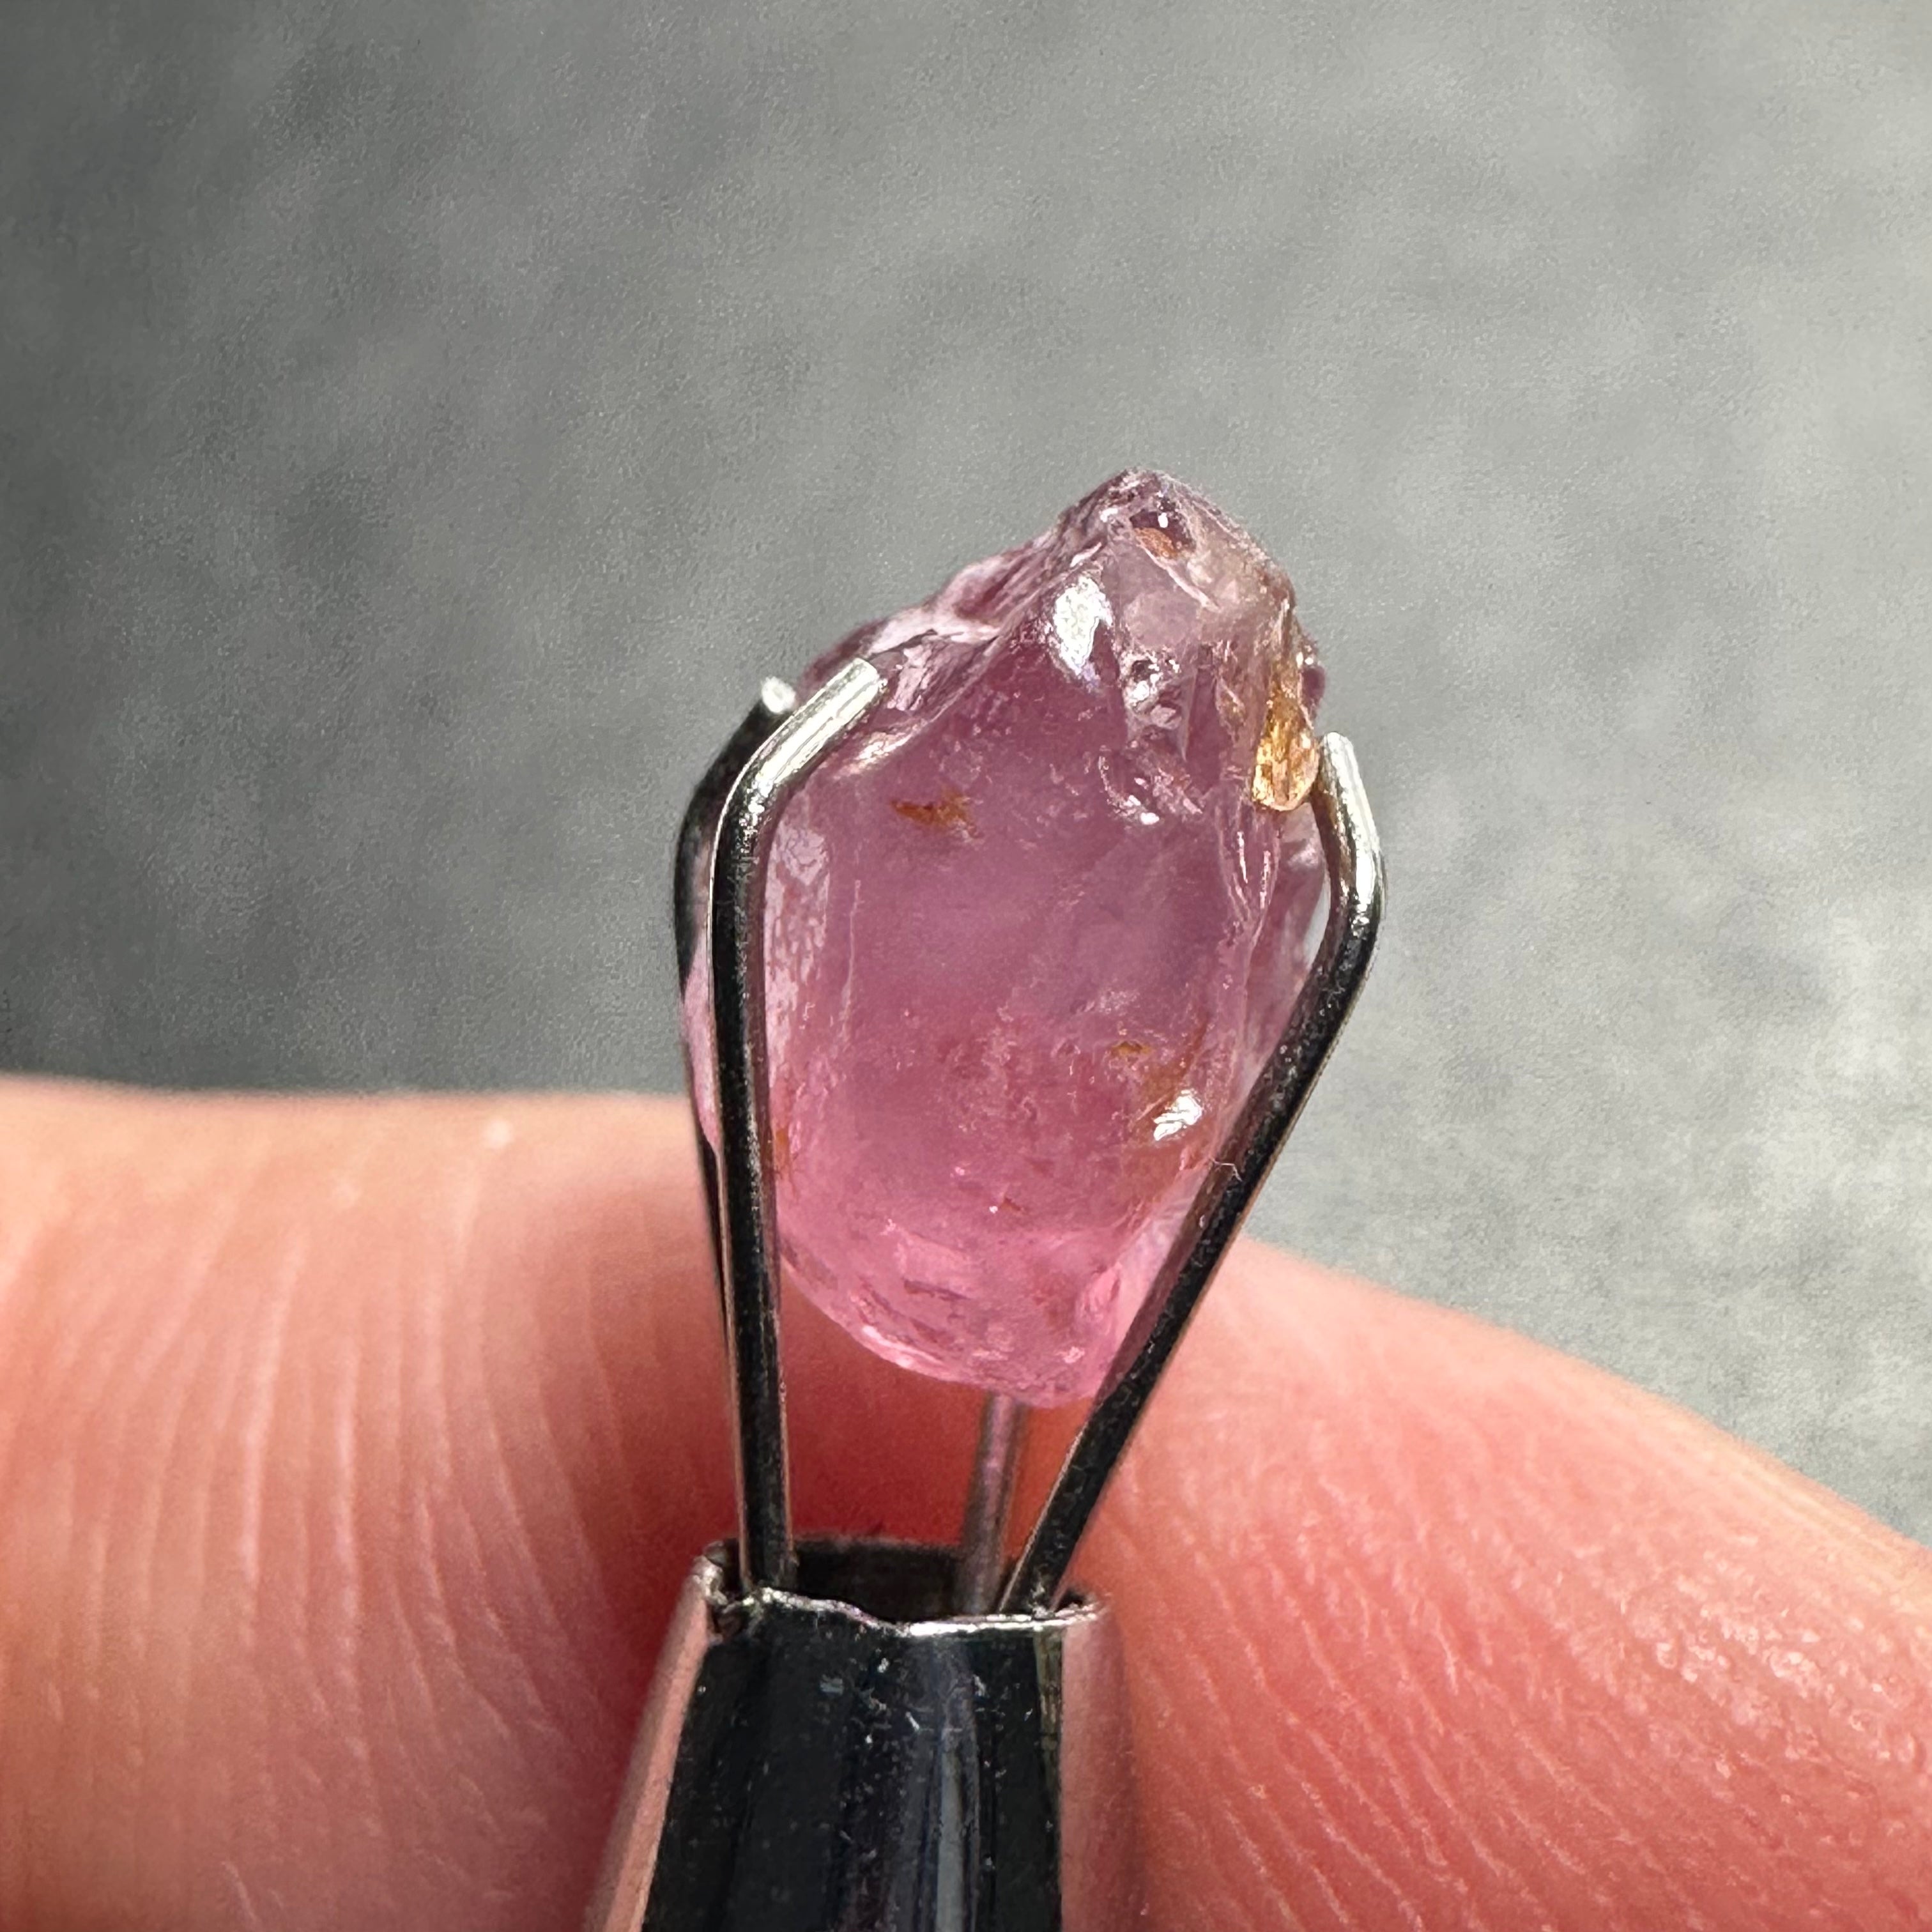 2.80Ct Pink Spinel Tanzania Vs-Vvs + Silky Untreated Unheated